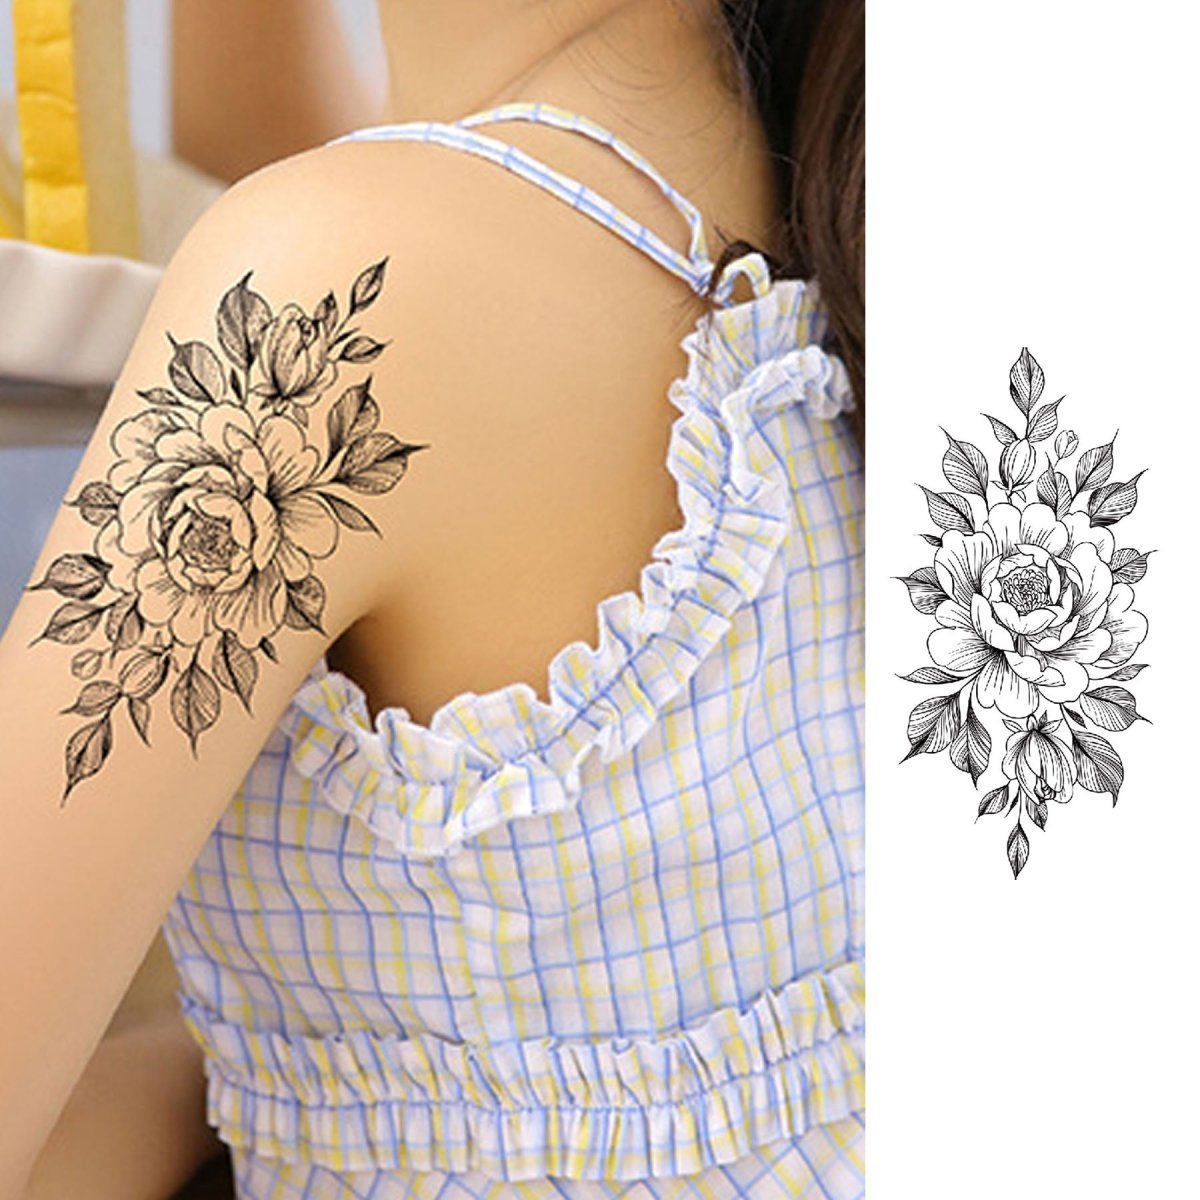 Yazhiji 60 Sheets Waterproof Temporary Tattoos - Tiny Fake Tattoo, Flowers  Crowns Stars Animal Butterfly Collection - Walmart.com